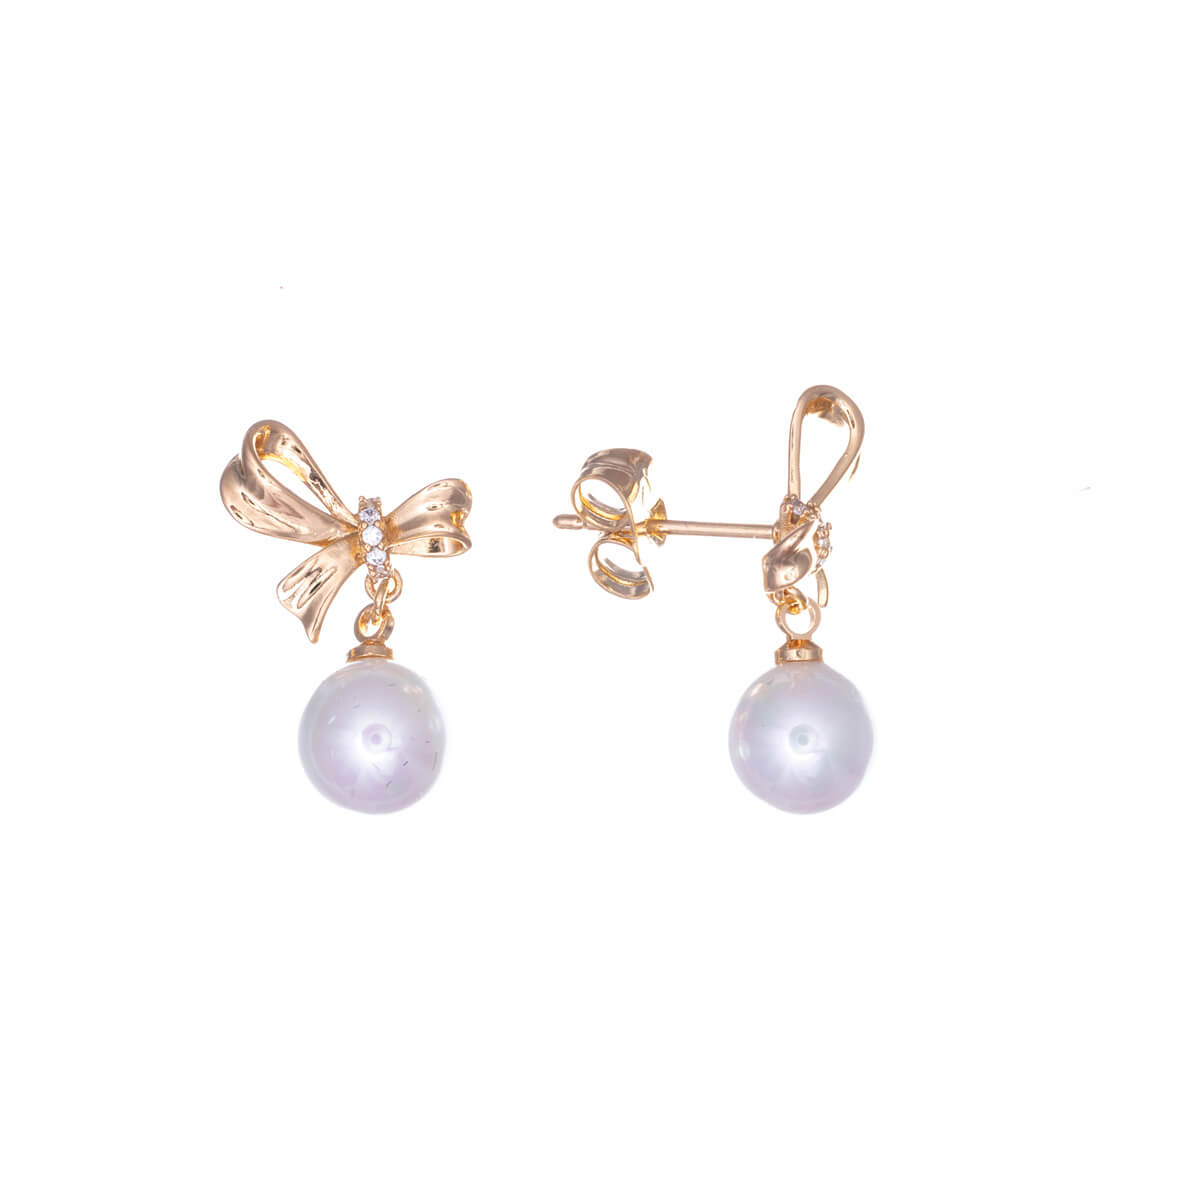 Hanging bow pearl earrings with zirconia stones